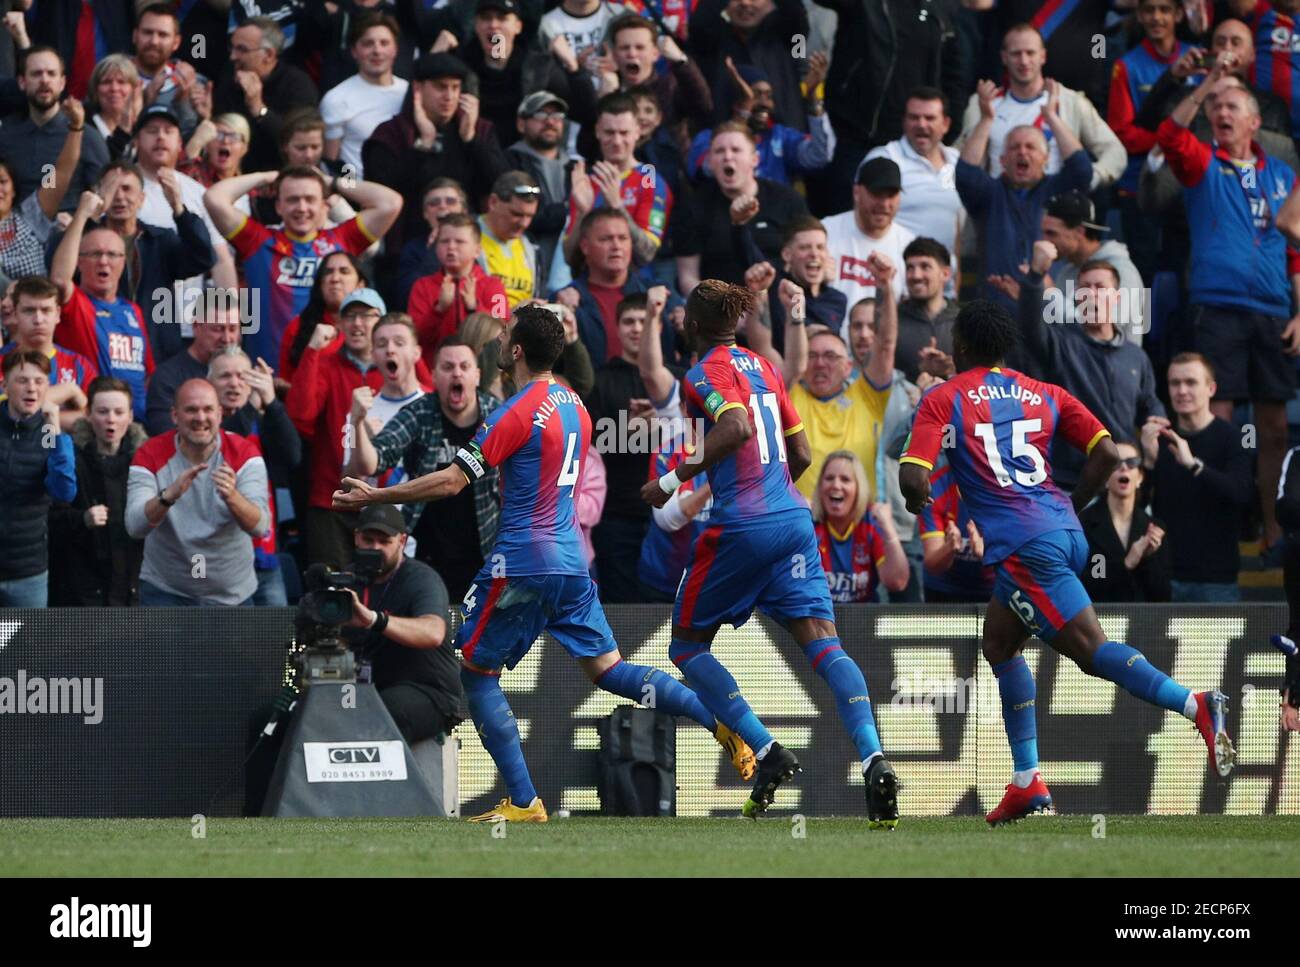 Soccer Football - Premier League - Crystal Palace v Huddersfield Town - Selhurst Park, London, Britain - March 30, 2019  Crystal Palace's Luka Milivojevic celebrates scoring their first goal with team mates     REUTERS/Hannah McKay  EDITORIAL USE ONLY. No use with unauthorized audio, video, data, fixture lists, club/league logos or "live" services. Online in-match use limited to 75 images, no video emulation. No use in betting, games or single club/league/player publications.  Please contact your account representative for further details. Stock Photo